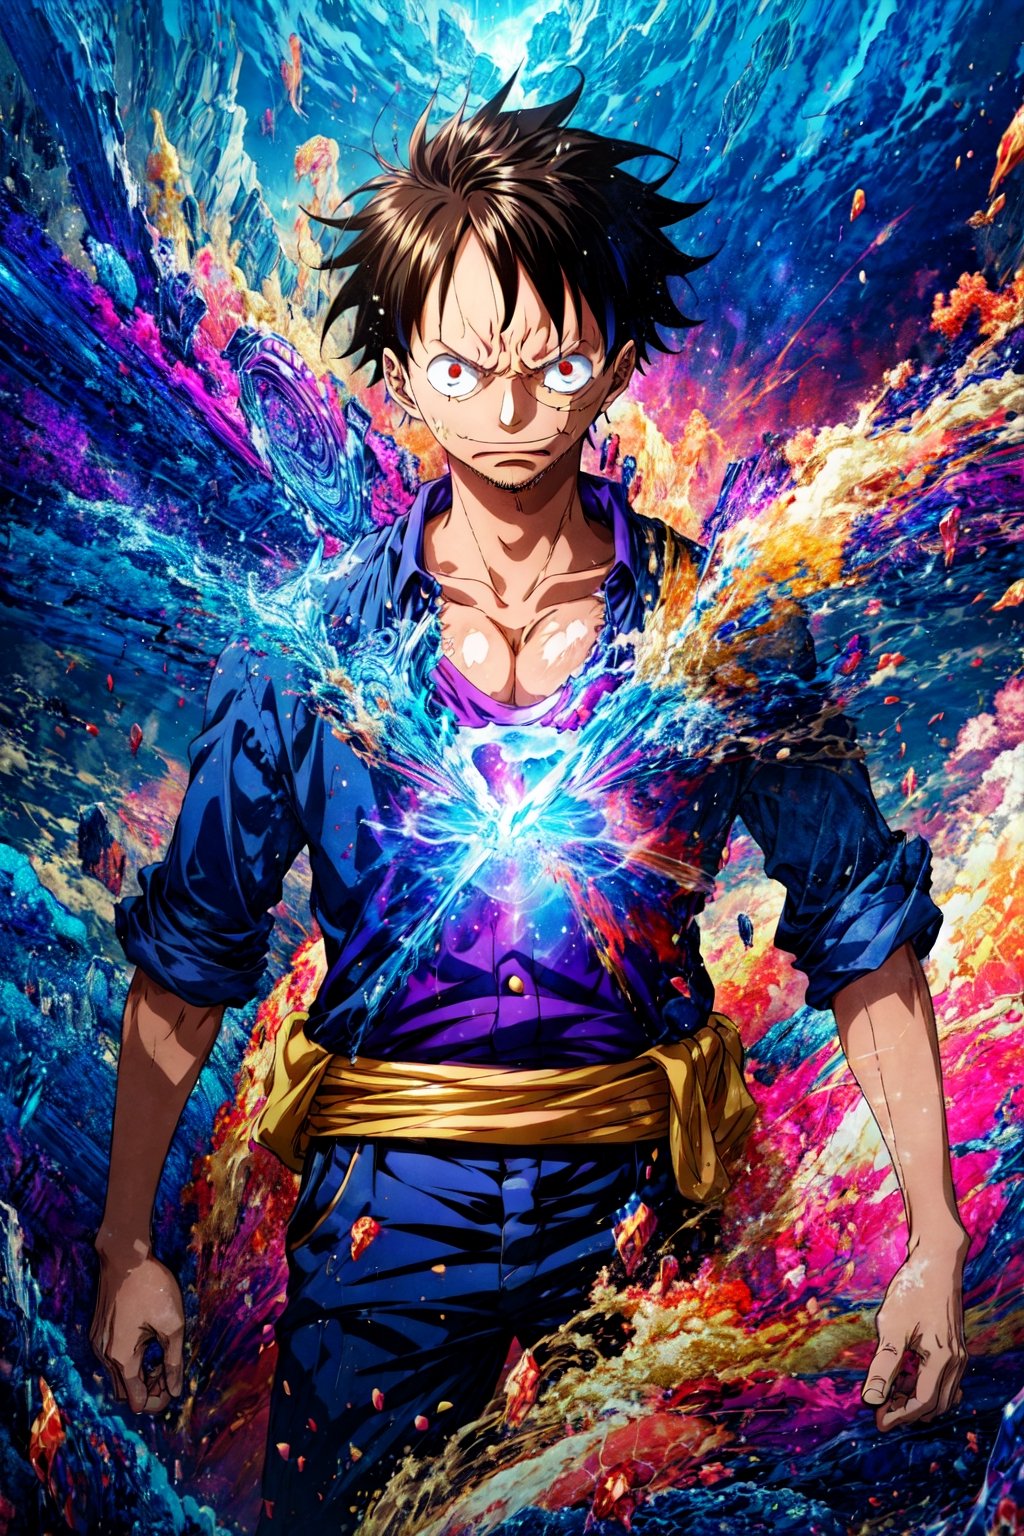 "Gear Fifth Revelation," Luffy's metamorphosis unfolds in an otherworldly domain. Craft with evocative metaphors and dynamic verbs. Environment: Ethereal Nexus, Luffy emerges within a kaleidoscopic dimension. Shifting hues and surreal landscapes surround him, a mesmerizing fusion of dreams and reality. Mood: Awe-Struck Wonder, The air crackles with celestial energy, Luffy's transformation elicits gasps of disbelief and admiration. Atmosphere: Surreal Harmony, Reality and fantasy converge, creating a surreal atmosphere where the extraordinary becomes the norm. Lighting: Luminous Spectra, Multidimensional beams intertwine, casting Luffy in a radiant glow. The colors dance, enhancing the ethereal spectacle.,monkey_d_luffy,Pirate,1utf1